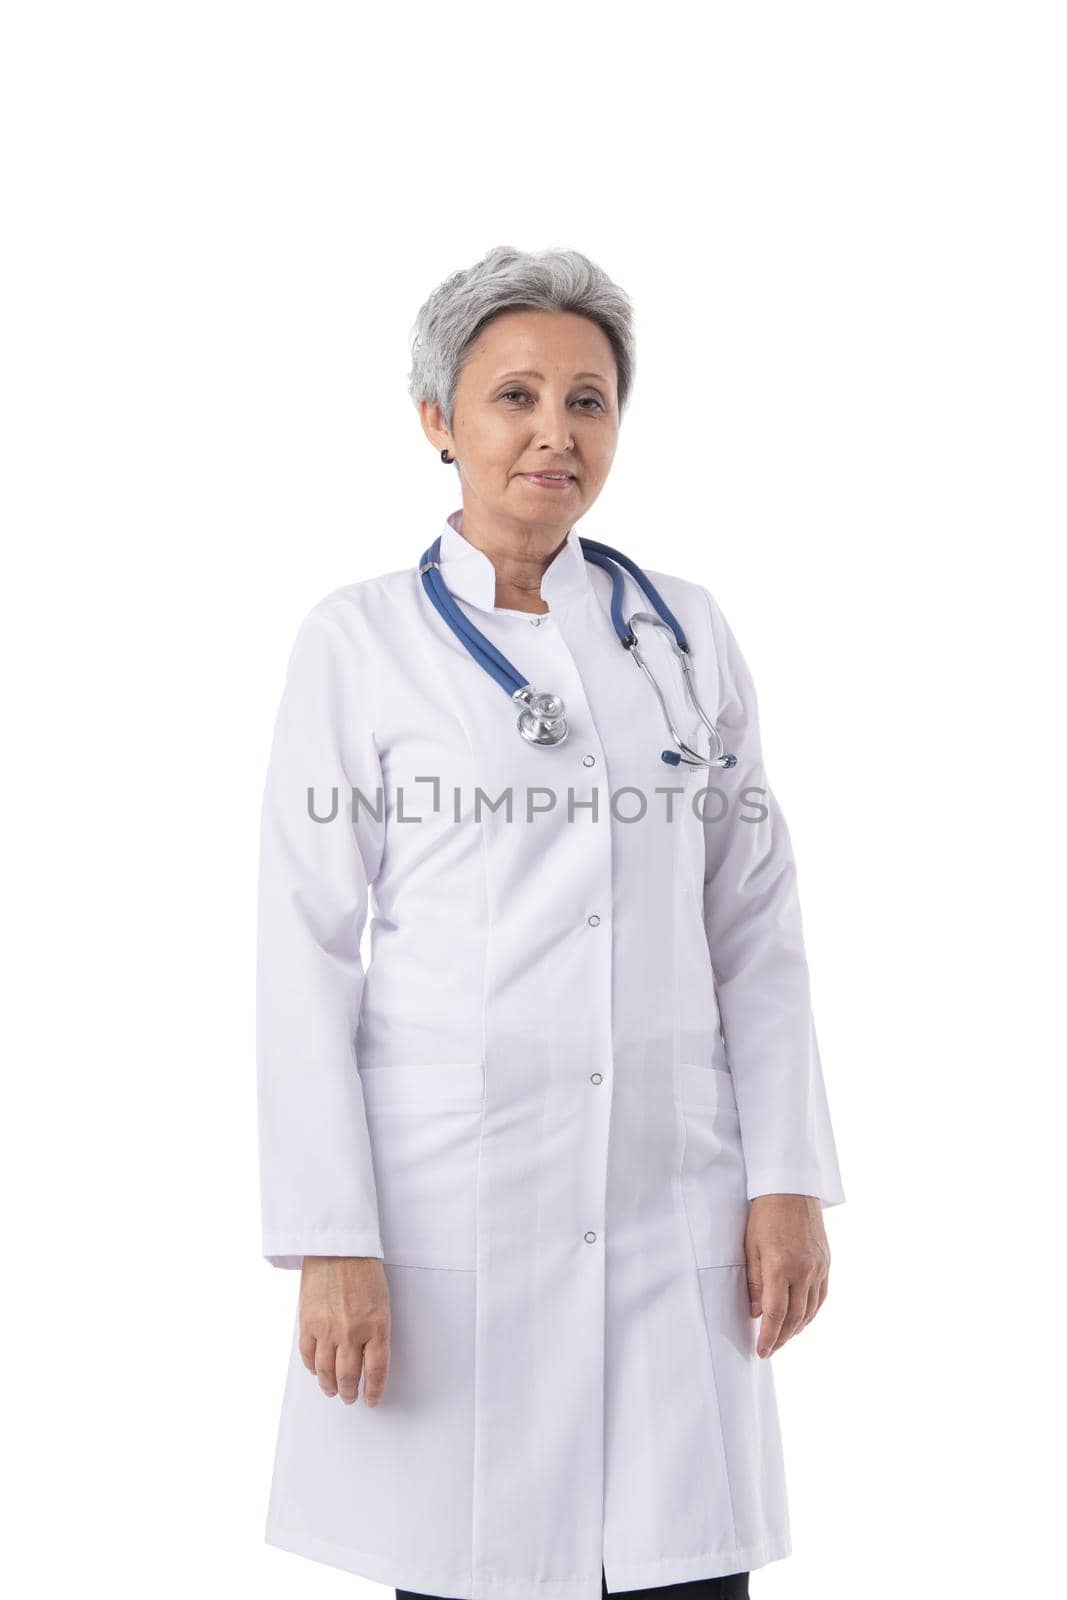 Mature female asian doctor by ALotOfPeople